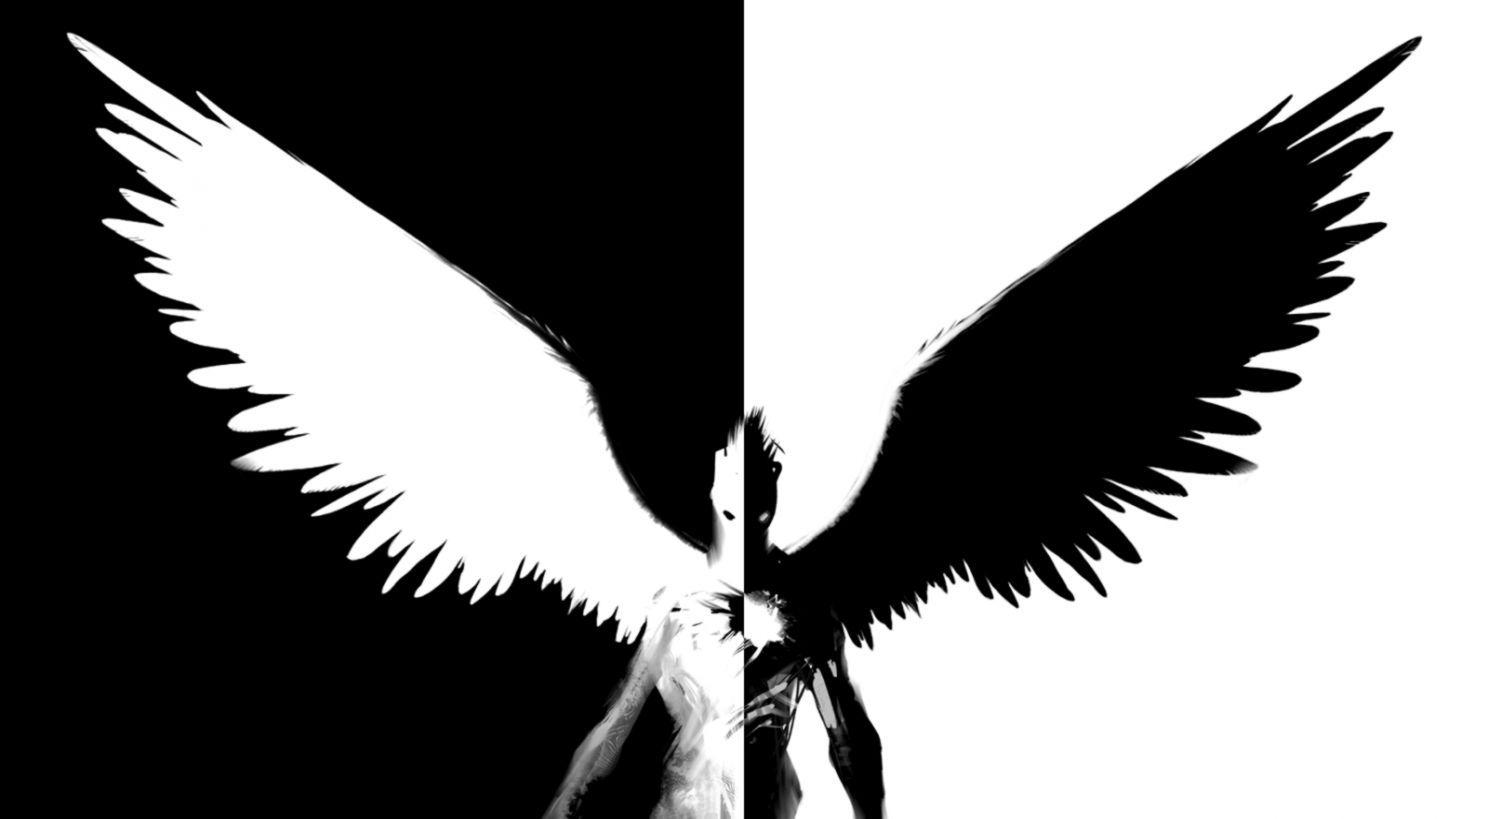 Bleach Black and White Wallpapers - Top Free Bleach Black and White